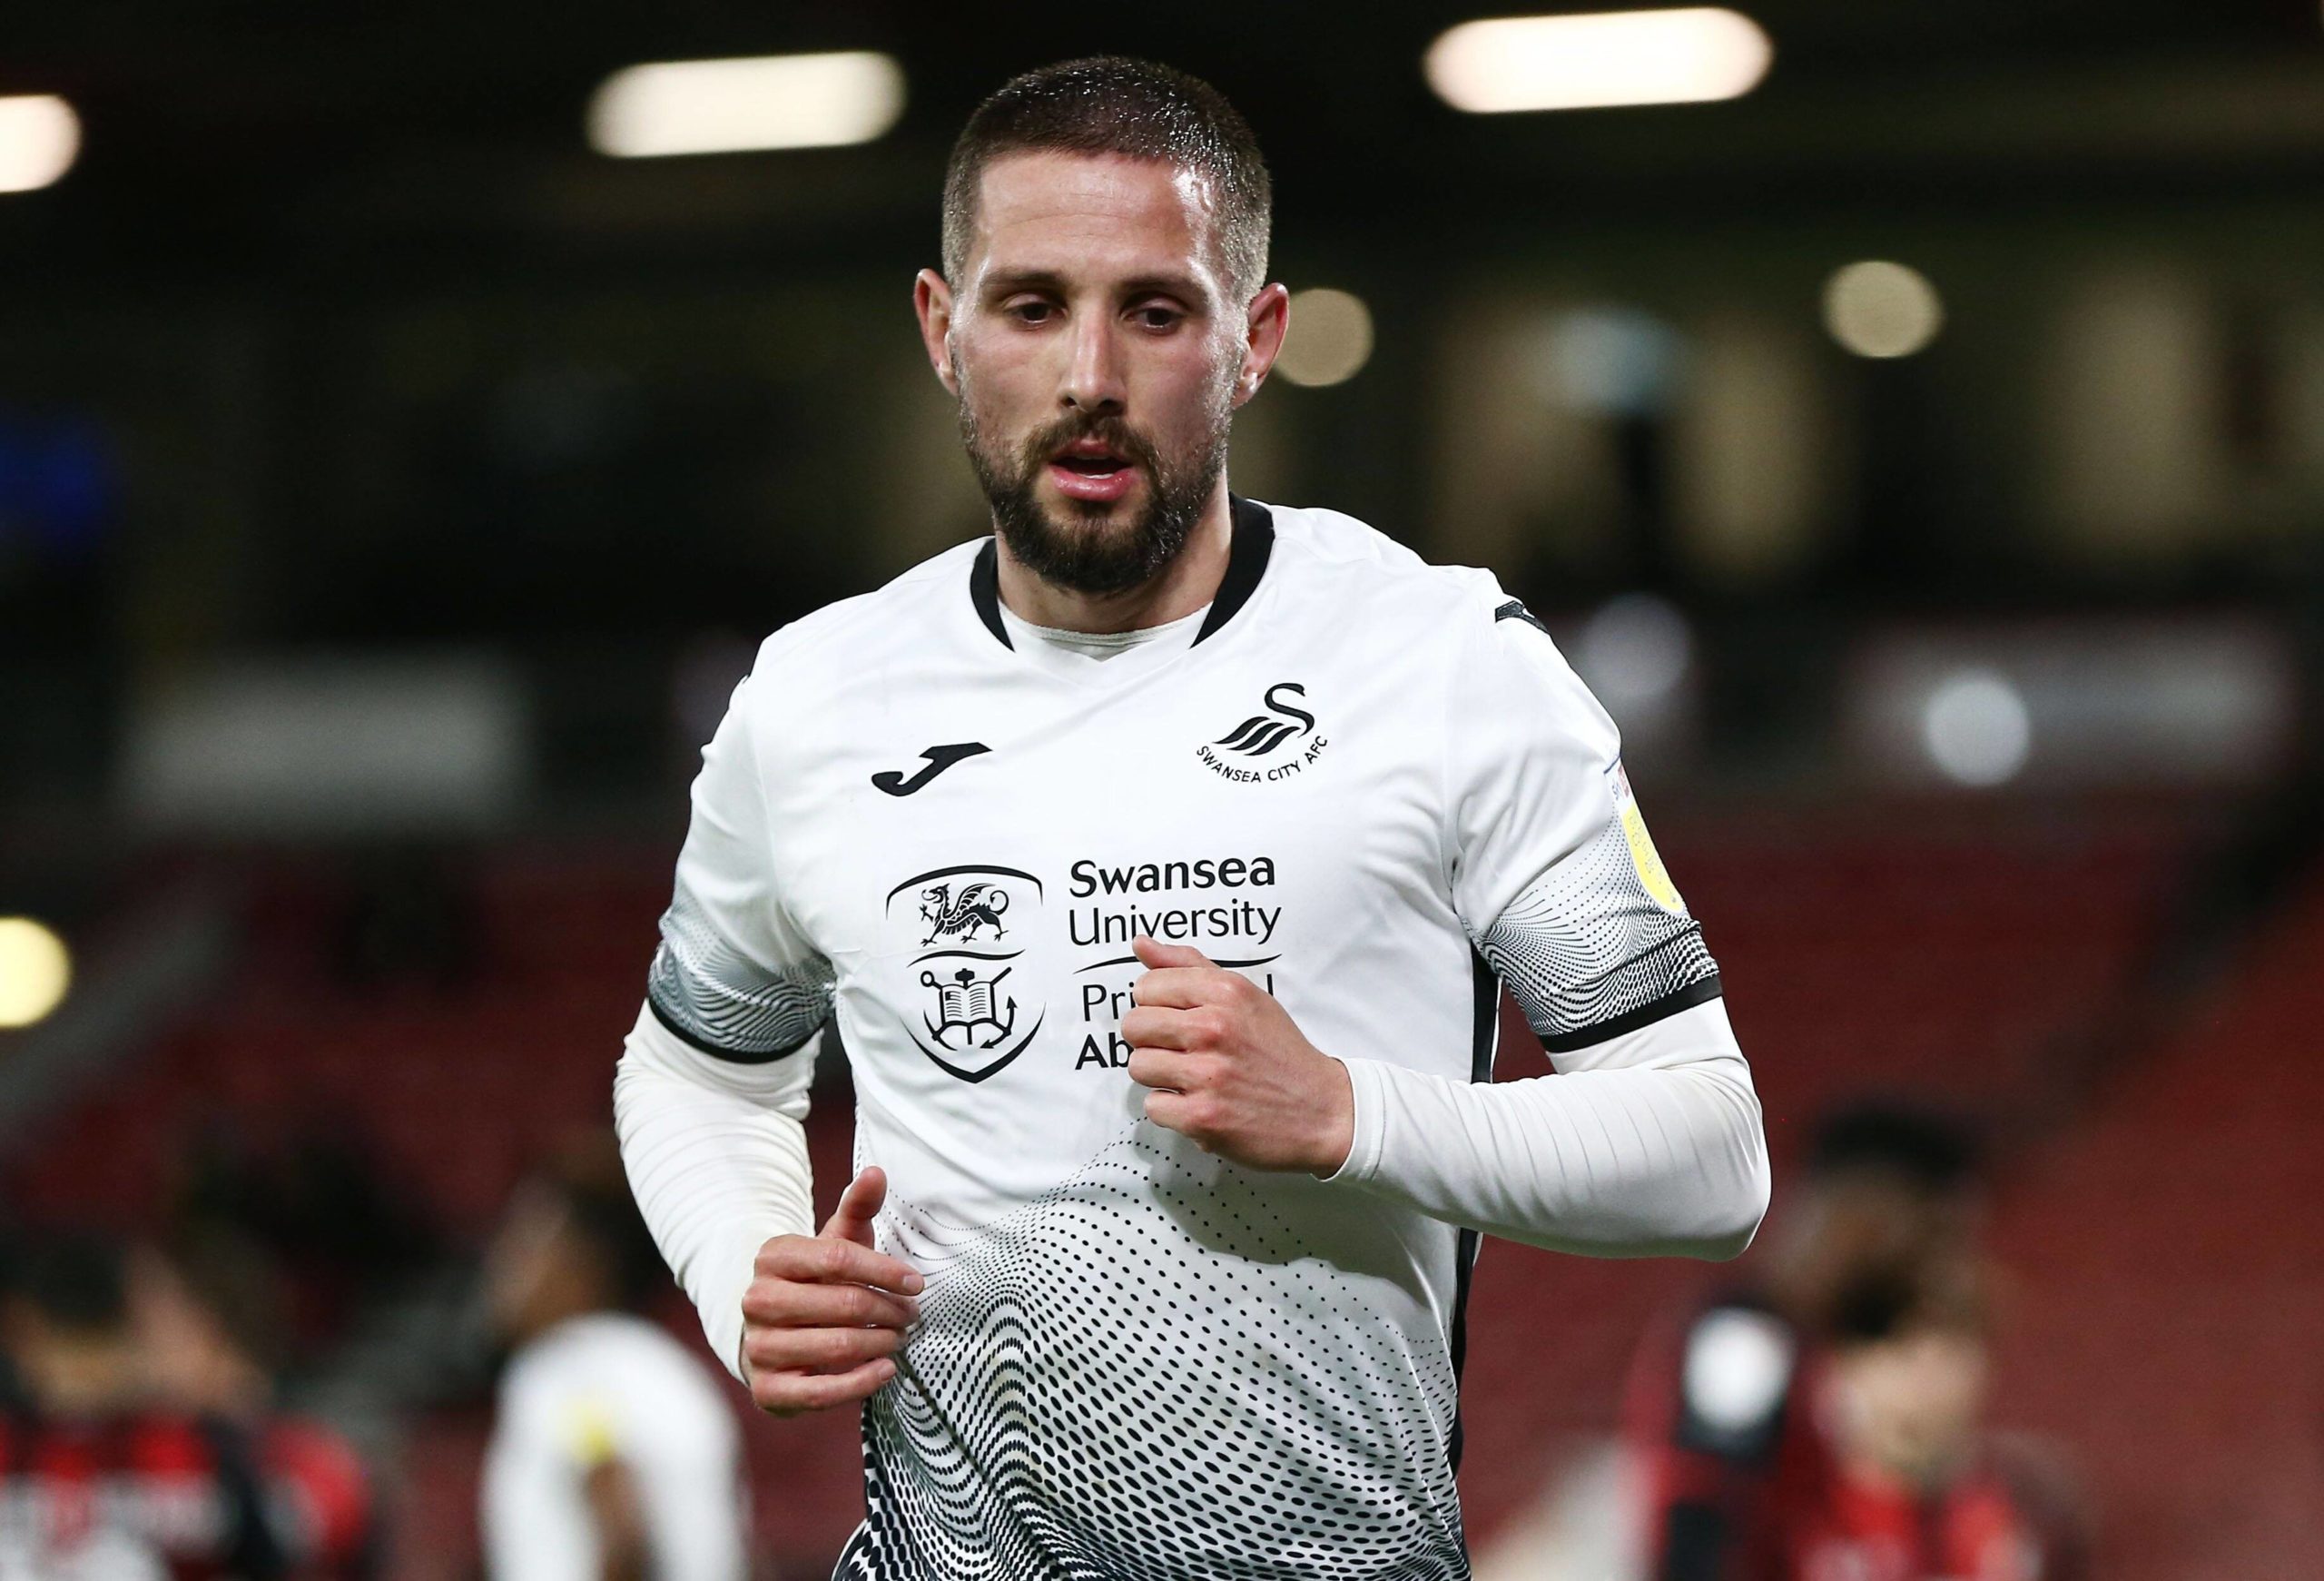 Newcastle United tipped to recruit Hourihane who is seen in the photo